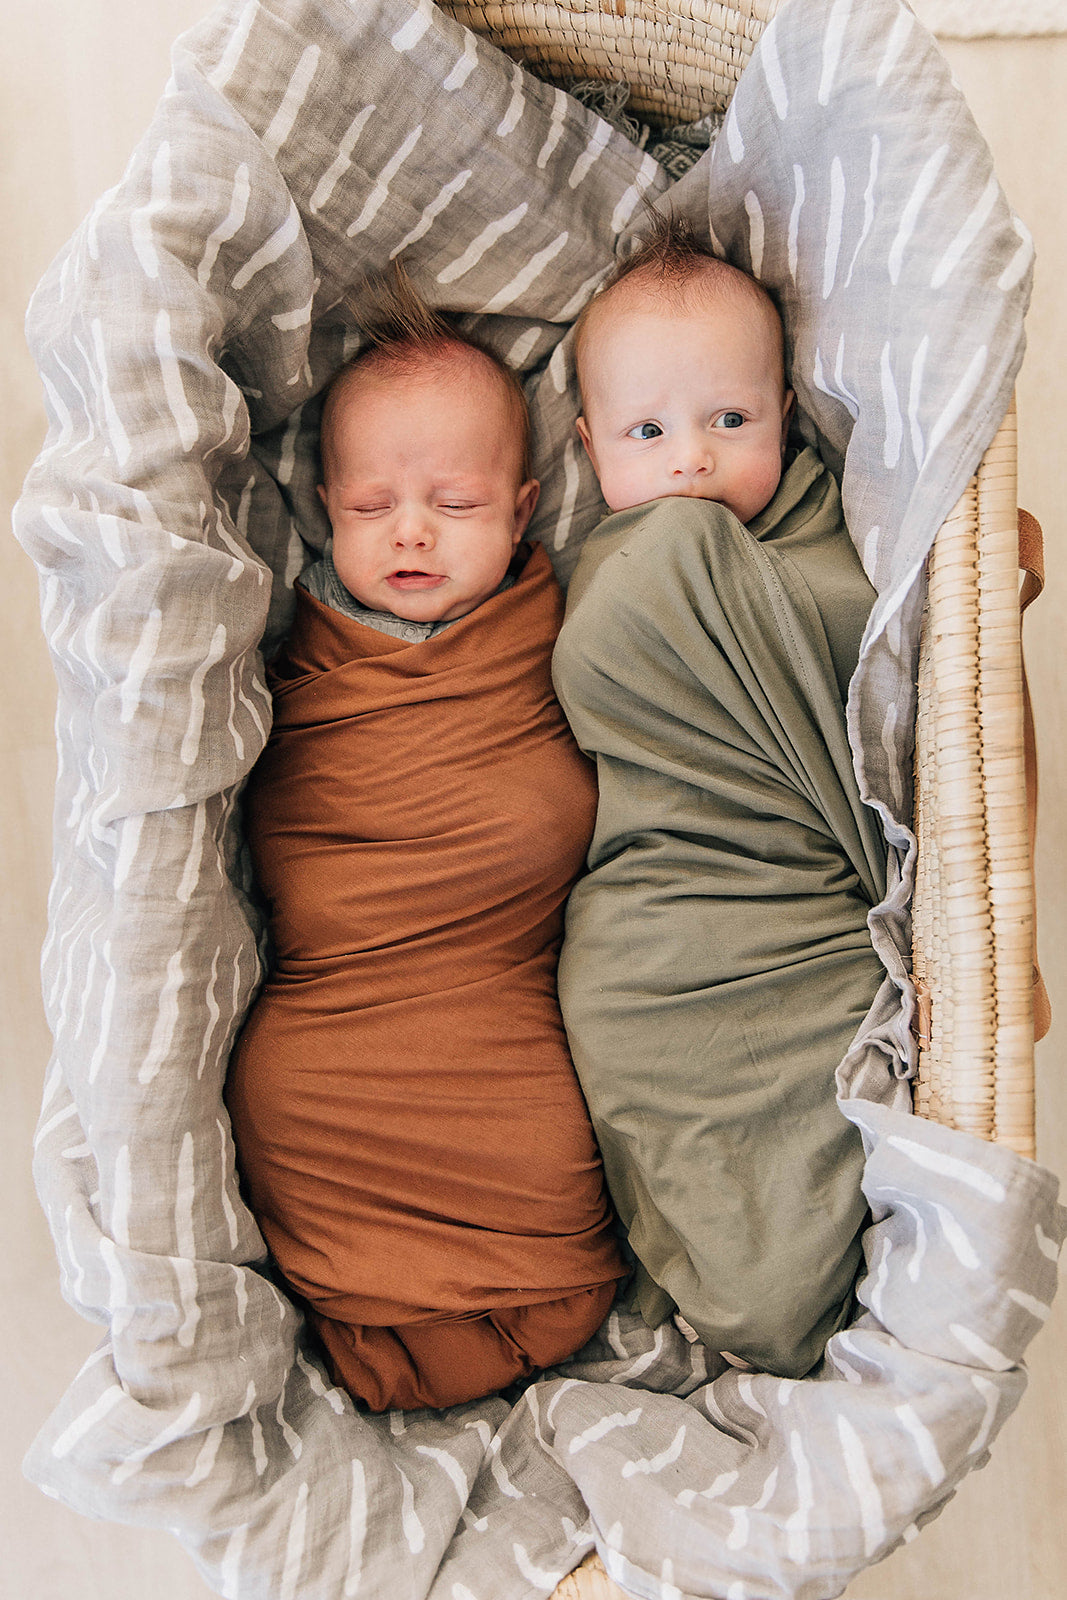 Mebie Baby Olive Stretch Swaddle. Mebie Baby Bamboo Stretch Swaddle. Gender Neutral for take home outfits and swaddling newborns. 